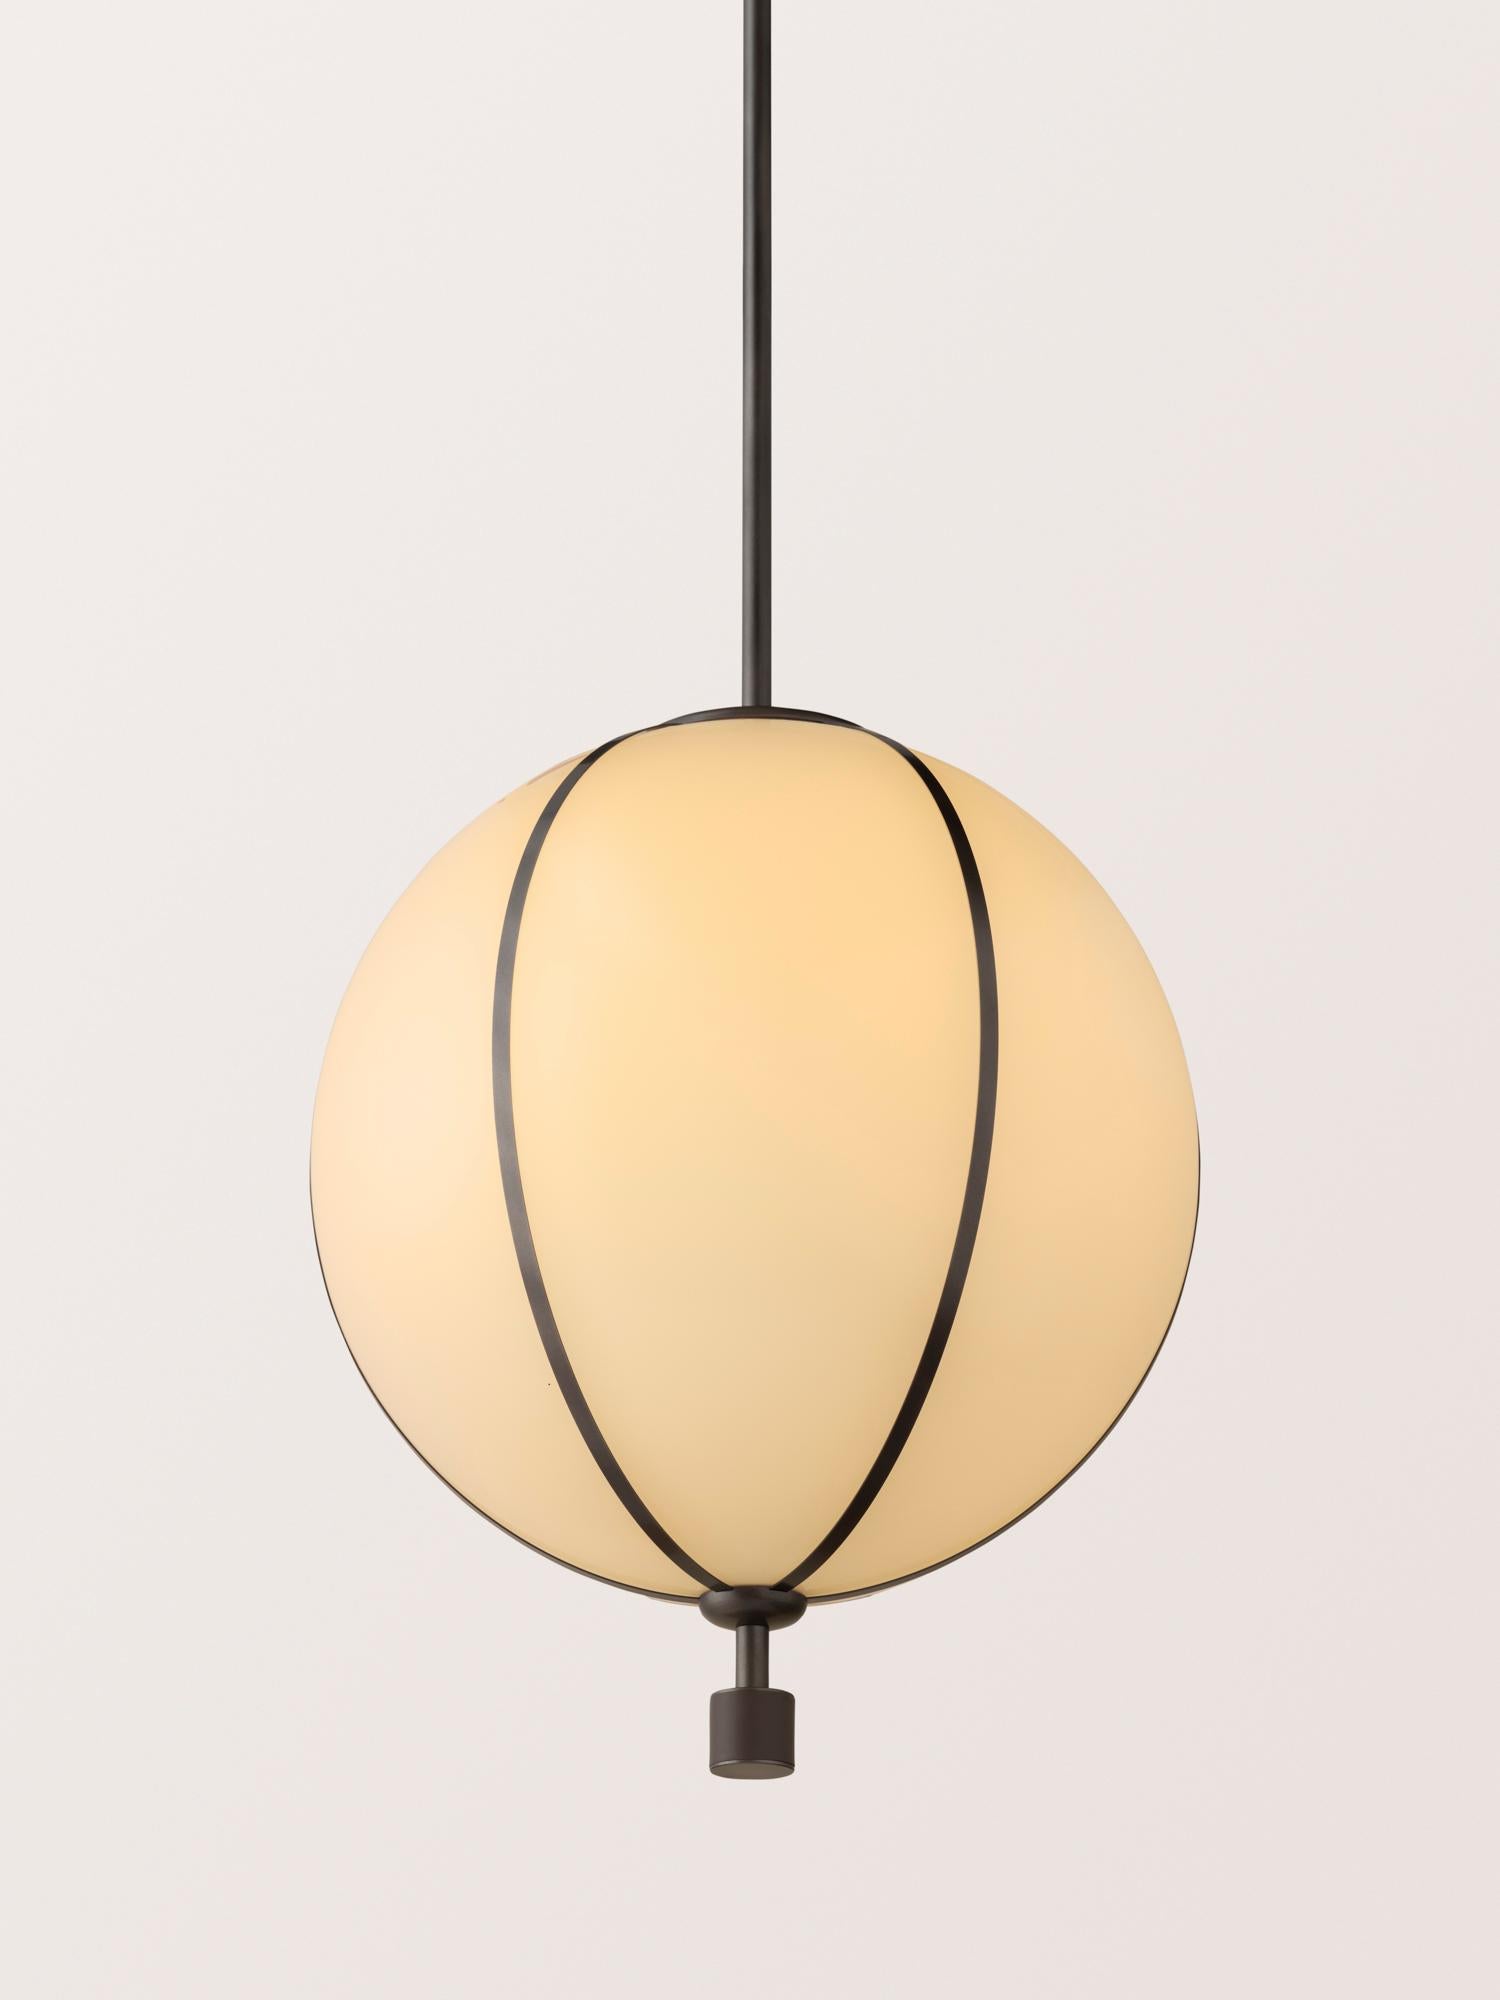 The Rib Pendant - Large Sphere is blown in Italy and delicately framed by thin brass ribs. A cylindrical brass finial, with optional hand-wrapped leather or suede, elongates the fixture and adds a finishing touch of refinement.

This listing is